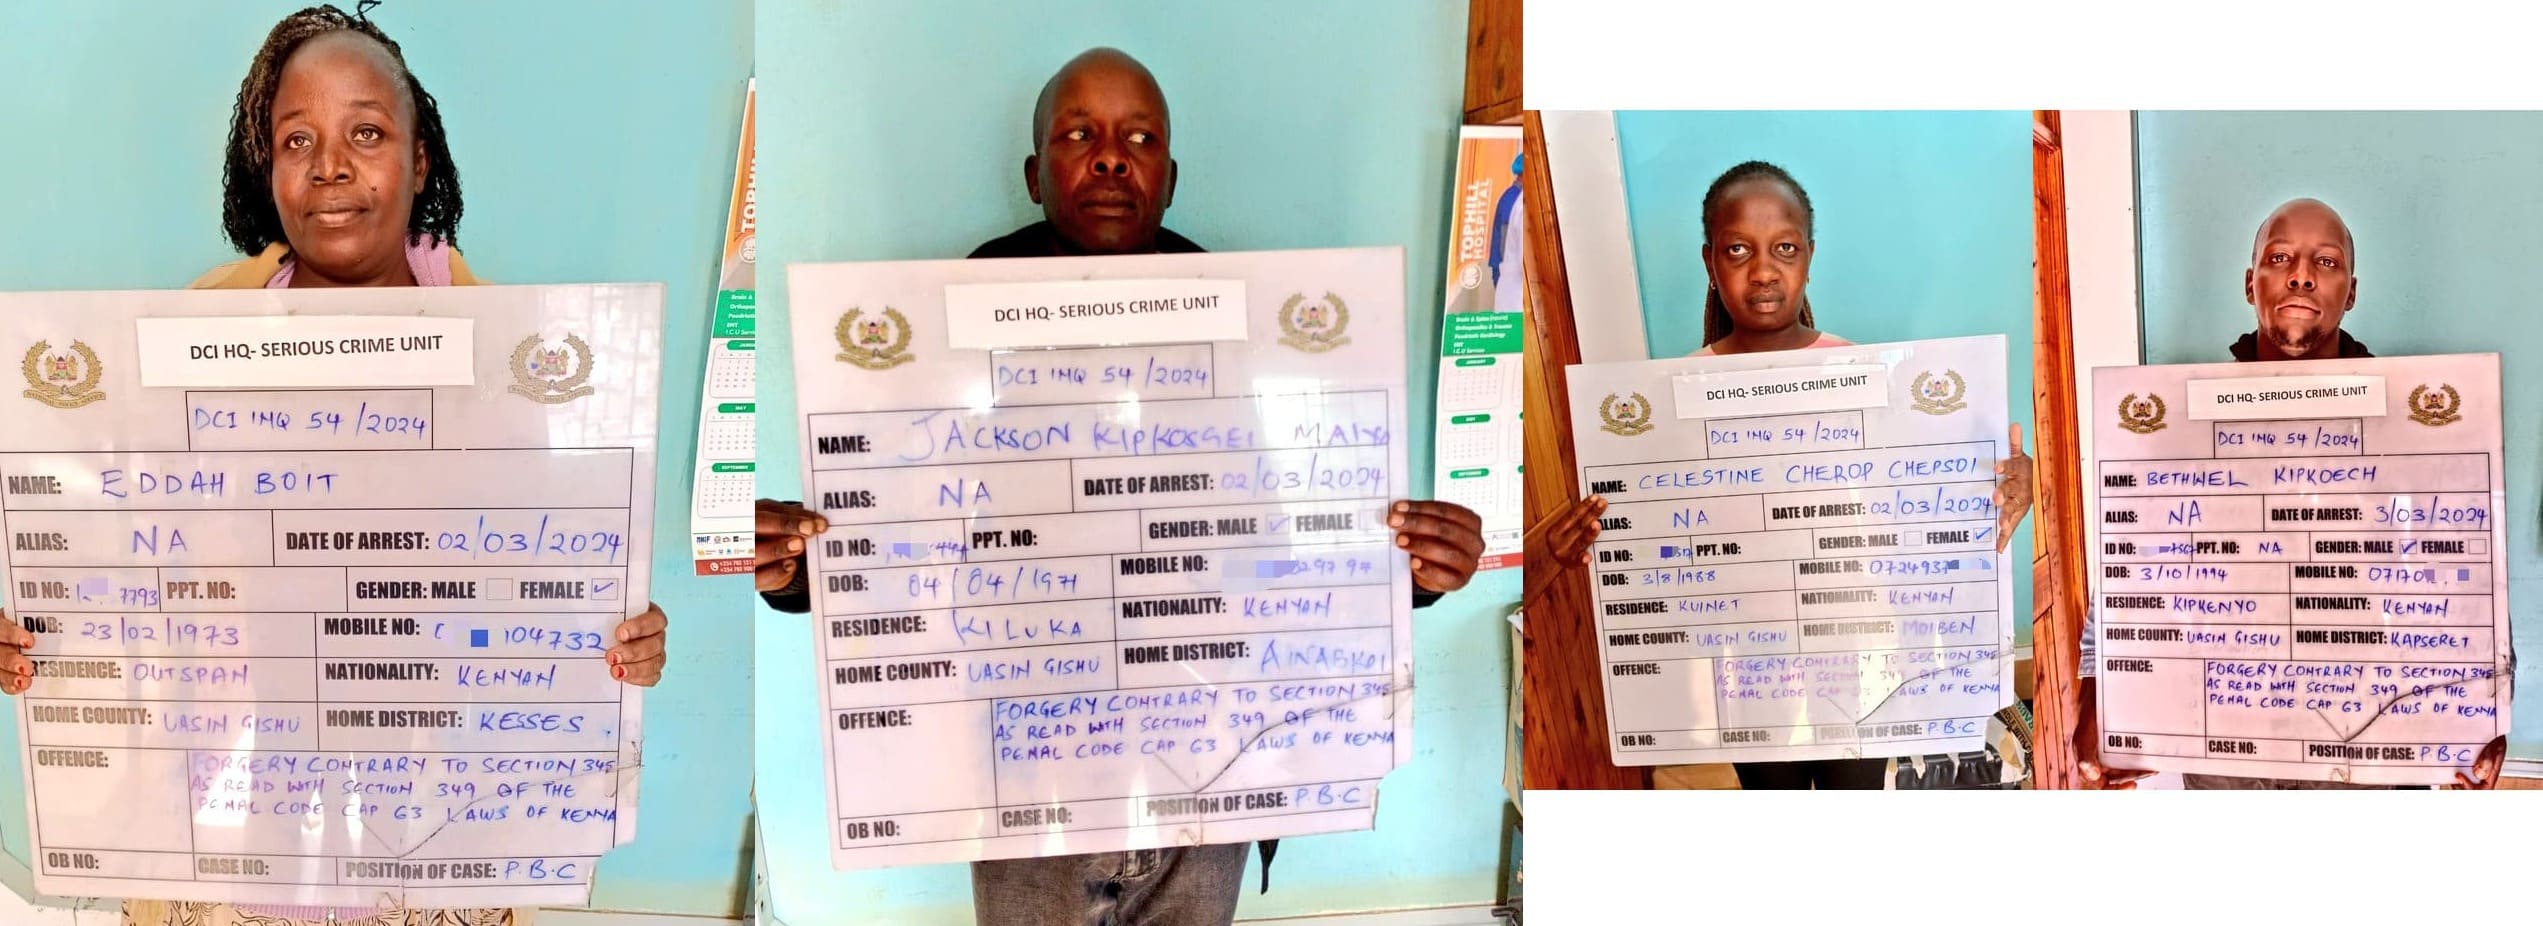 FOUR SUSPECTS WHO USED FORGED CERTIFICATES TO ACQUIRE PUBLIC SERVICE JOBS ARRAIGNED